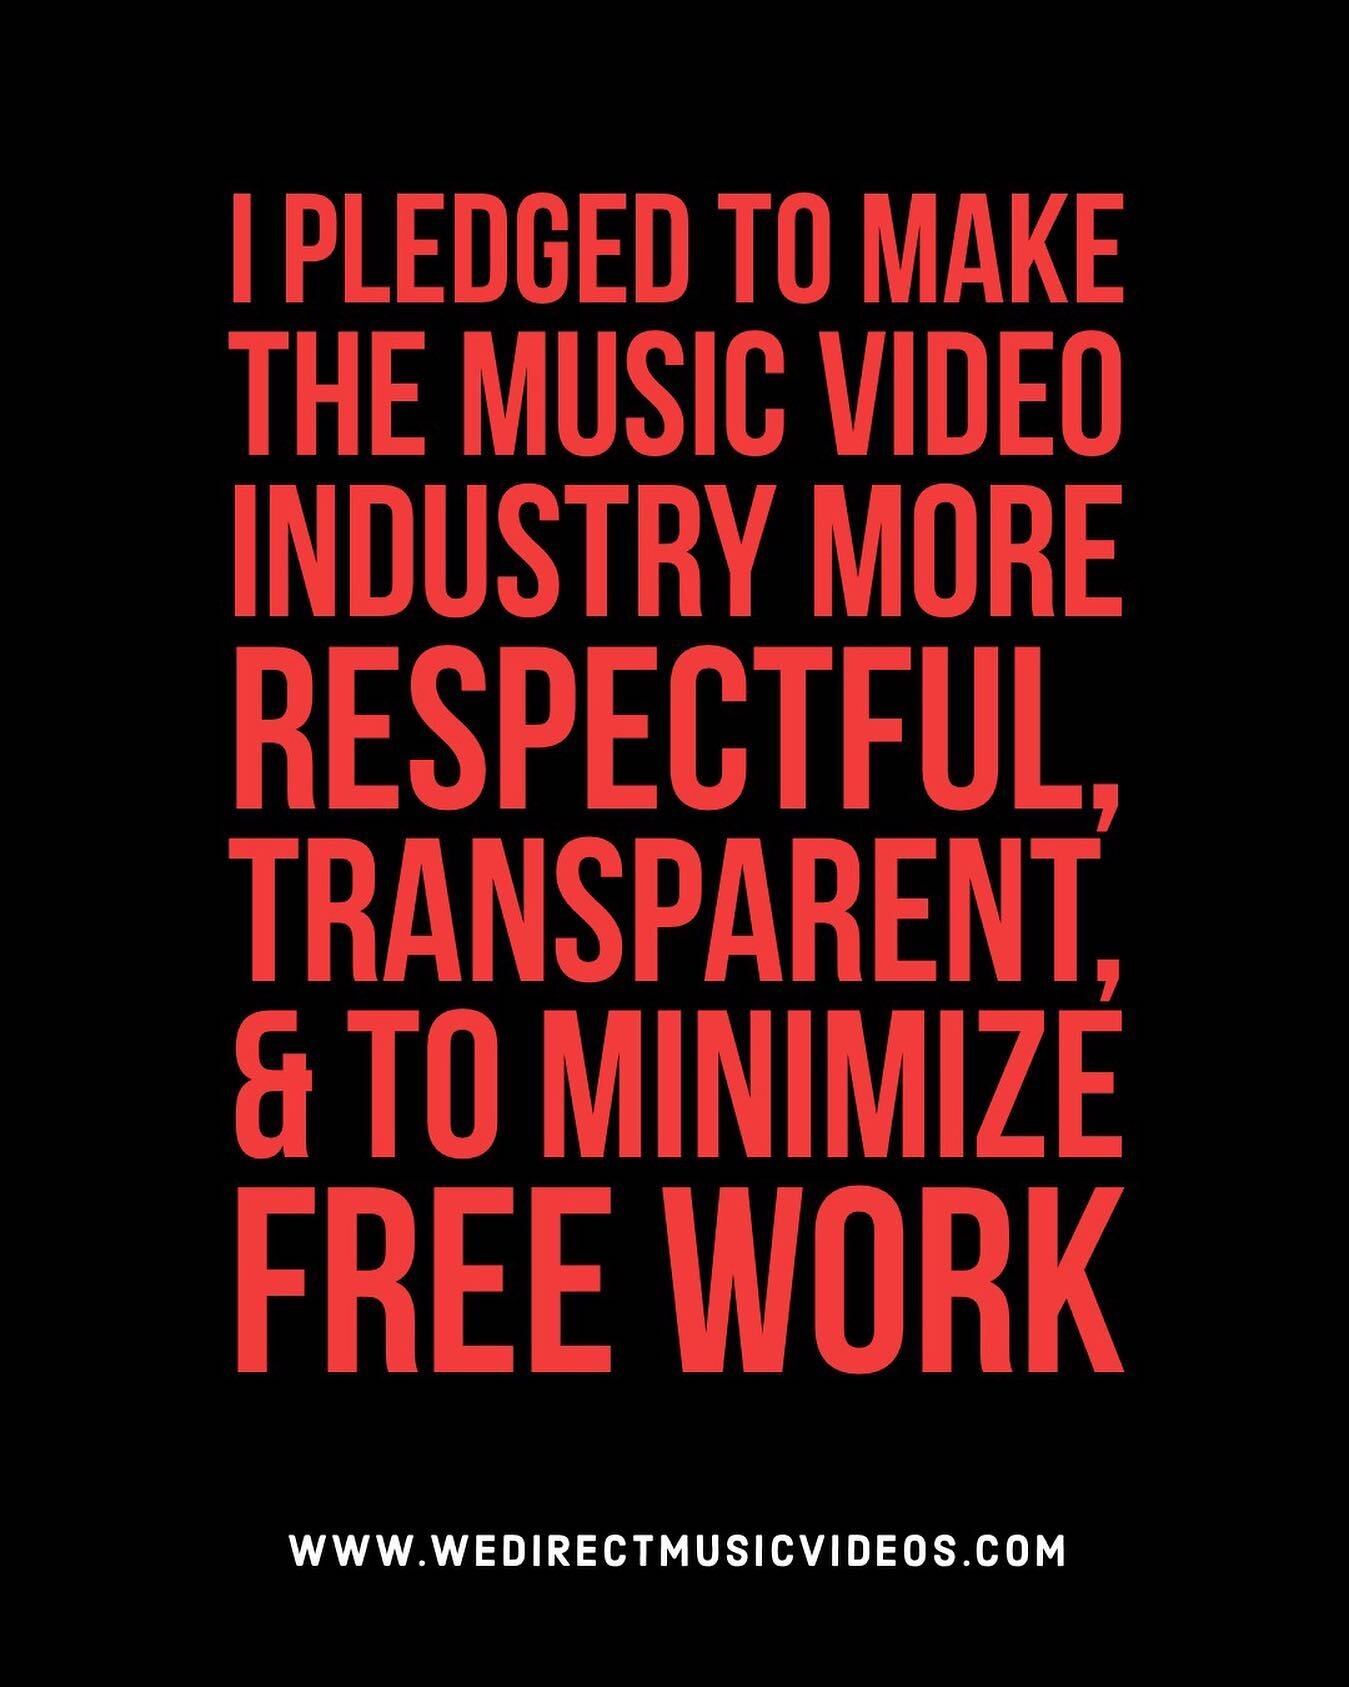 Stoked on what these peeps are up to. Gotta respect the craft. If this works out, I&rsquo;ll gladly ditch some adverts and get back into the music video game. Way more fulfilling as a creative. Stay at it @wedirectmv